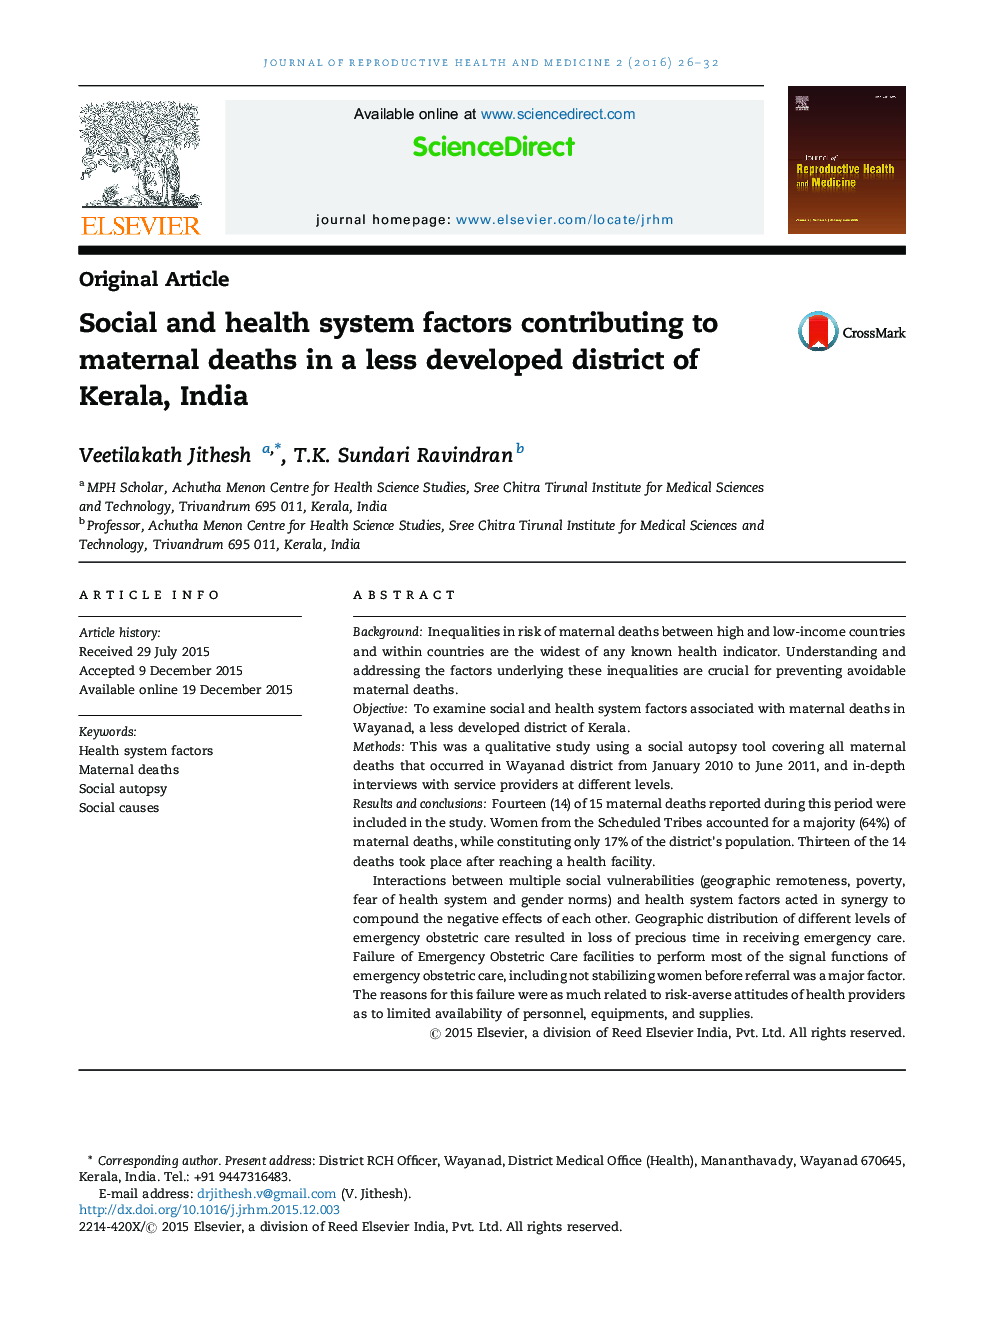 Social and health system factors contributing to maternal deaths in a less developed district of Kerala, India